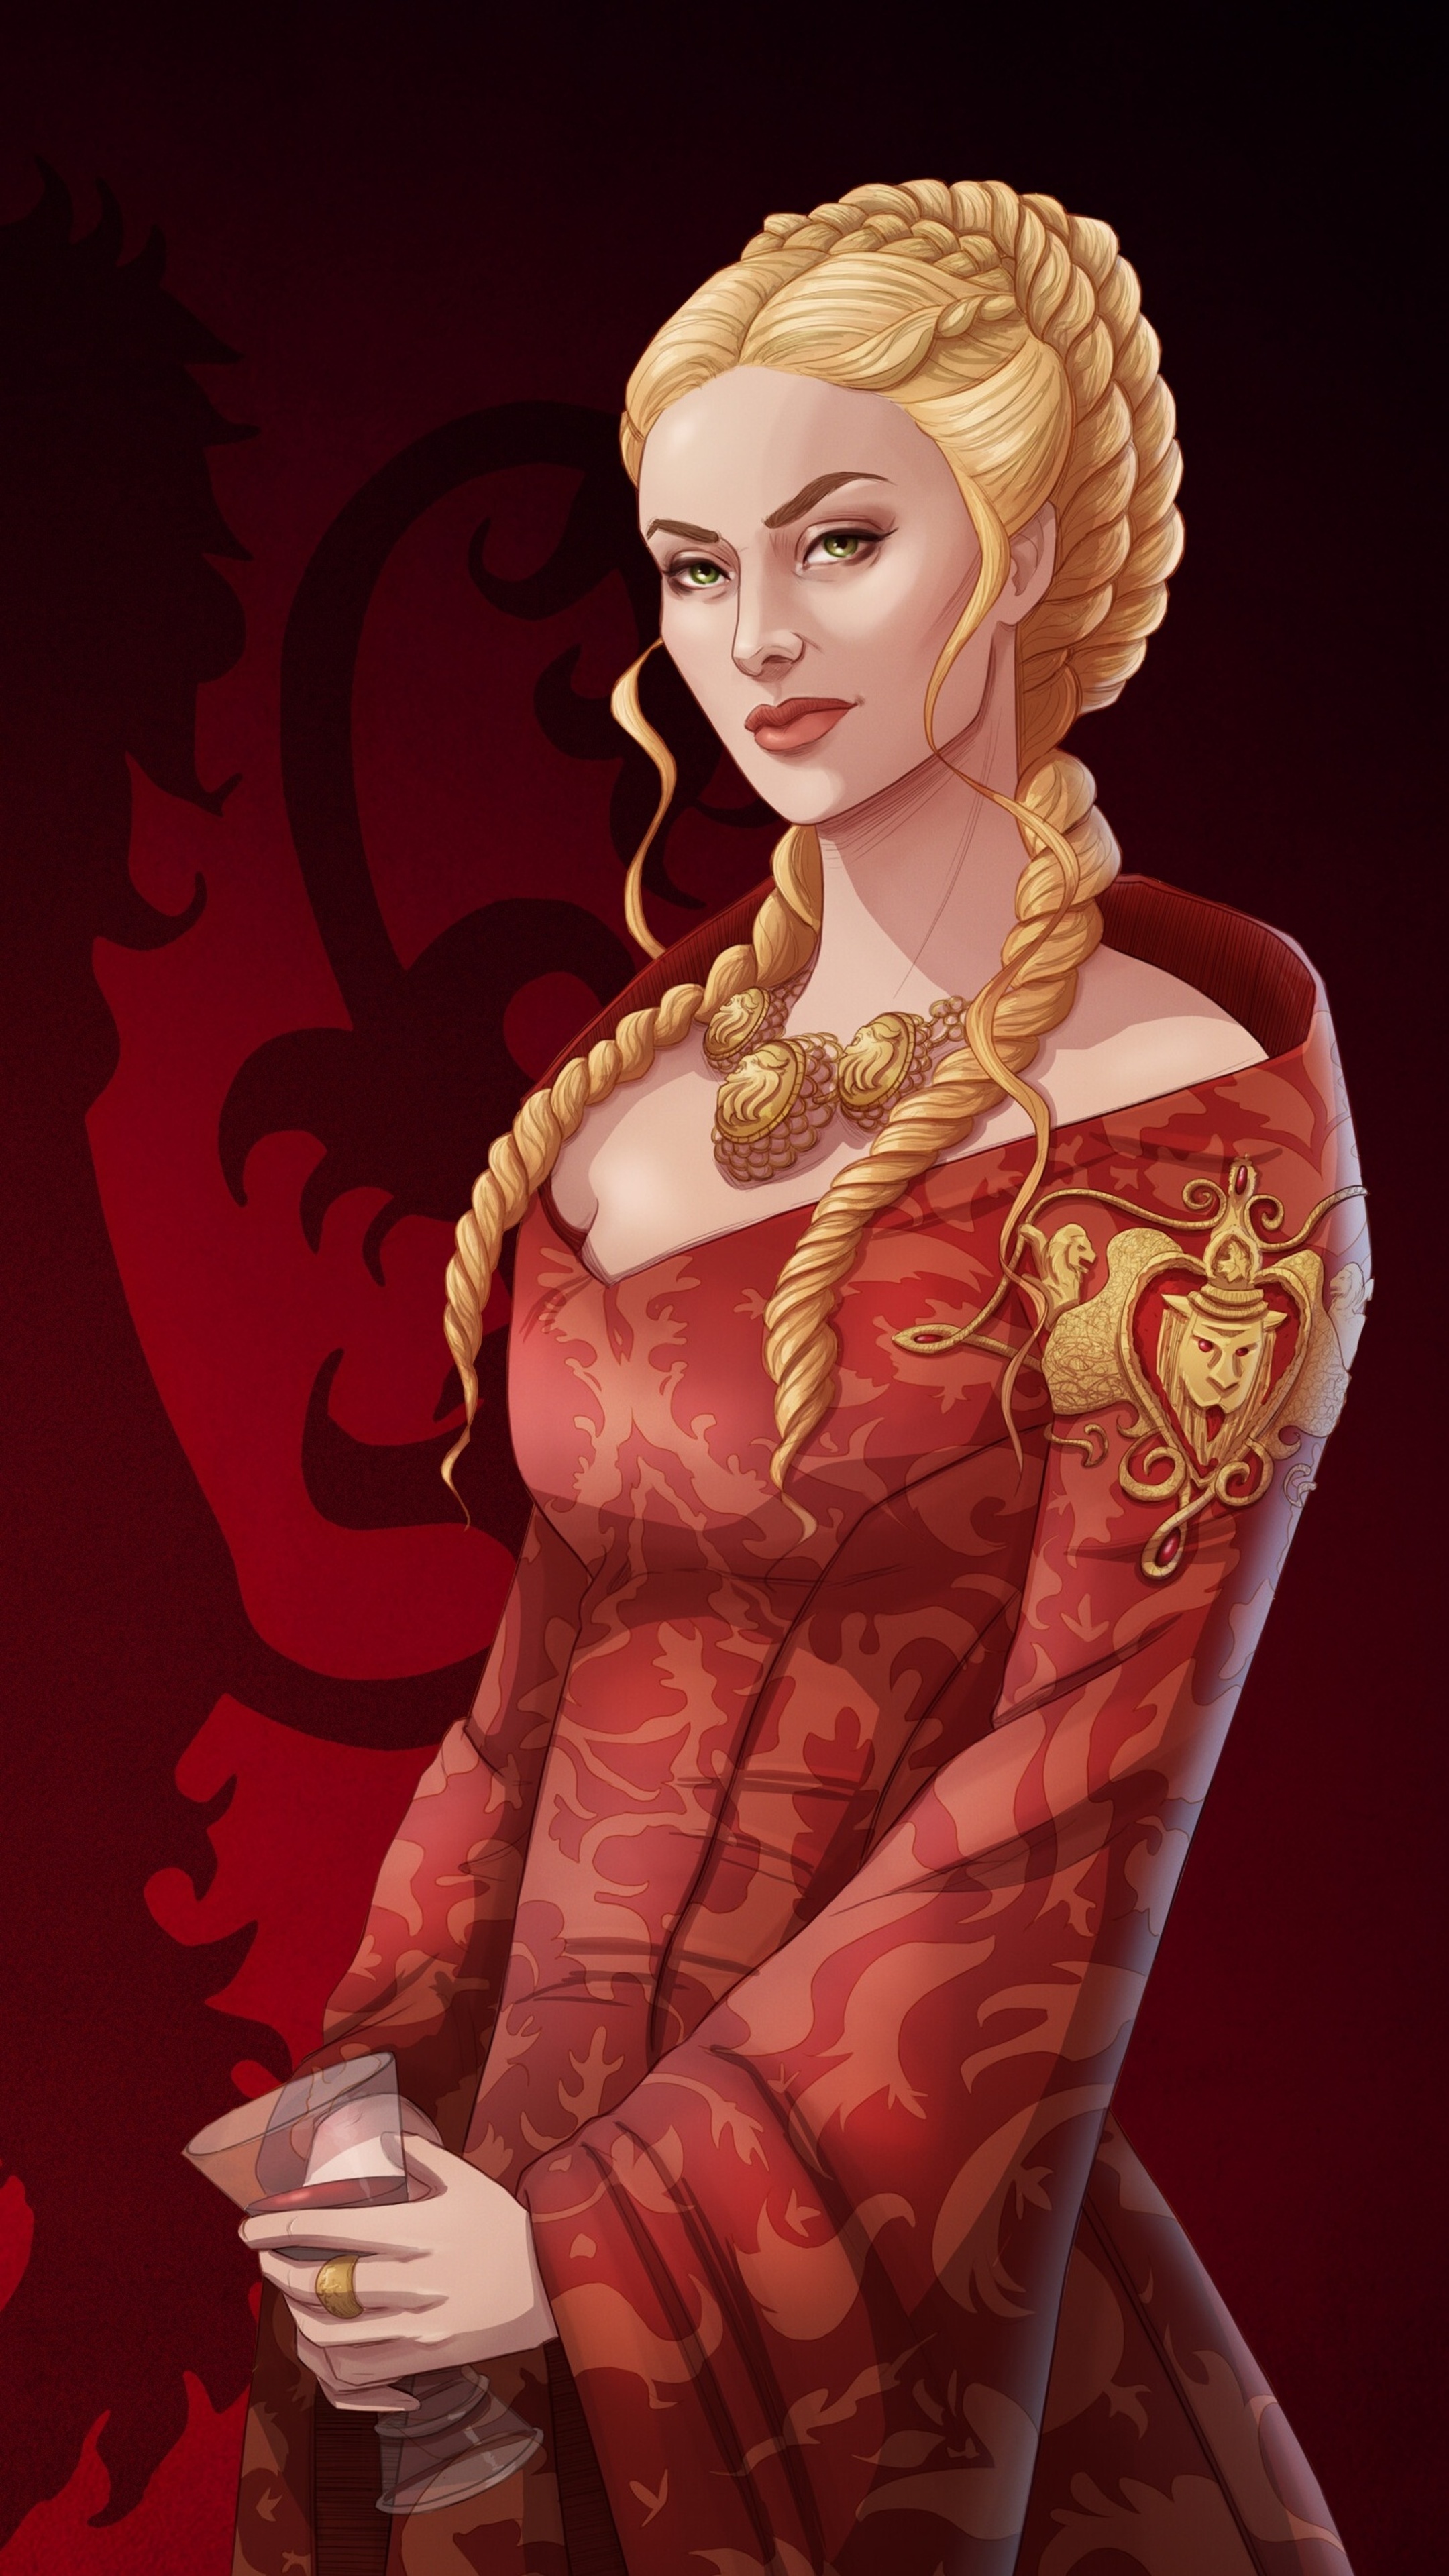 Cersei Lannister, Game of Thrones, 4K wallpapers, Xperia, 2160x3840 4K Handy